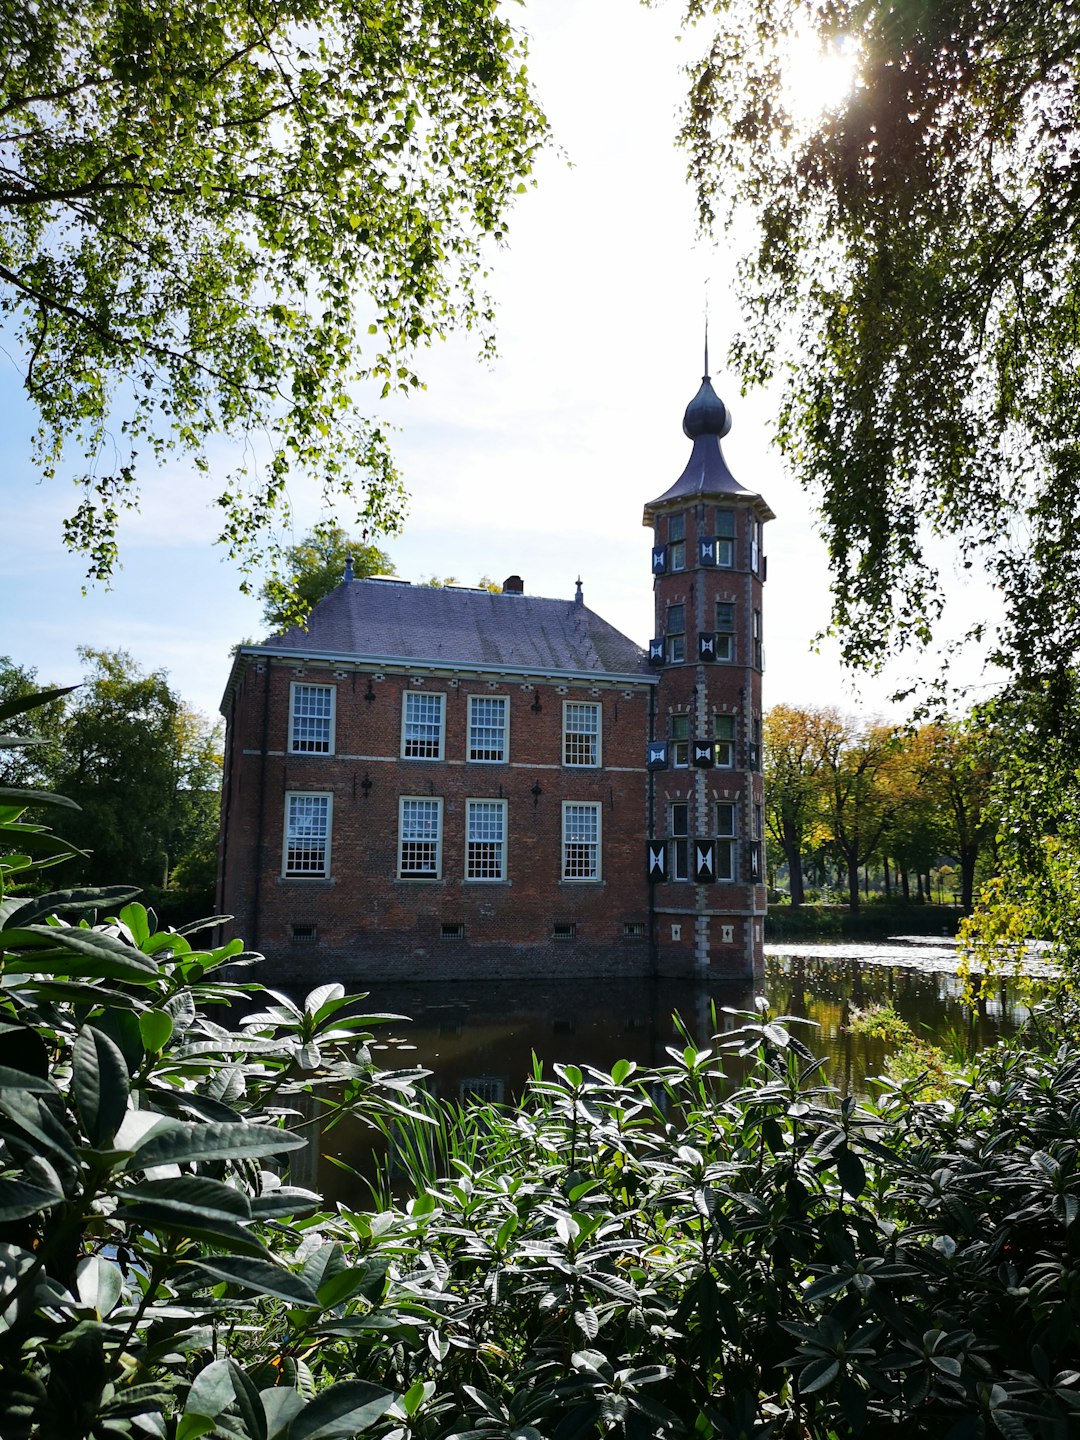 Travel Tips and Stories of Kasteel Bouvigne in Netherlands